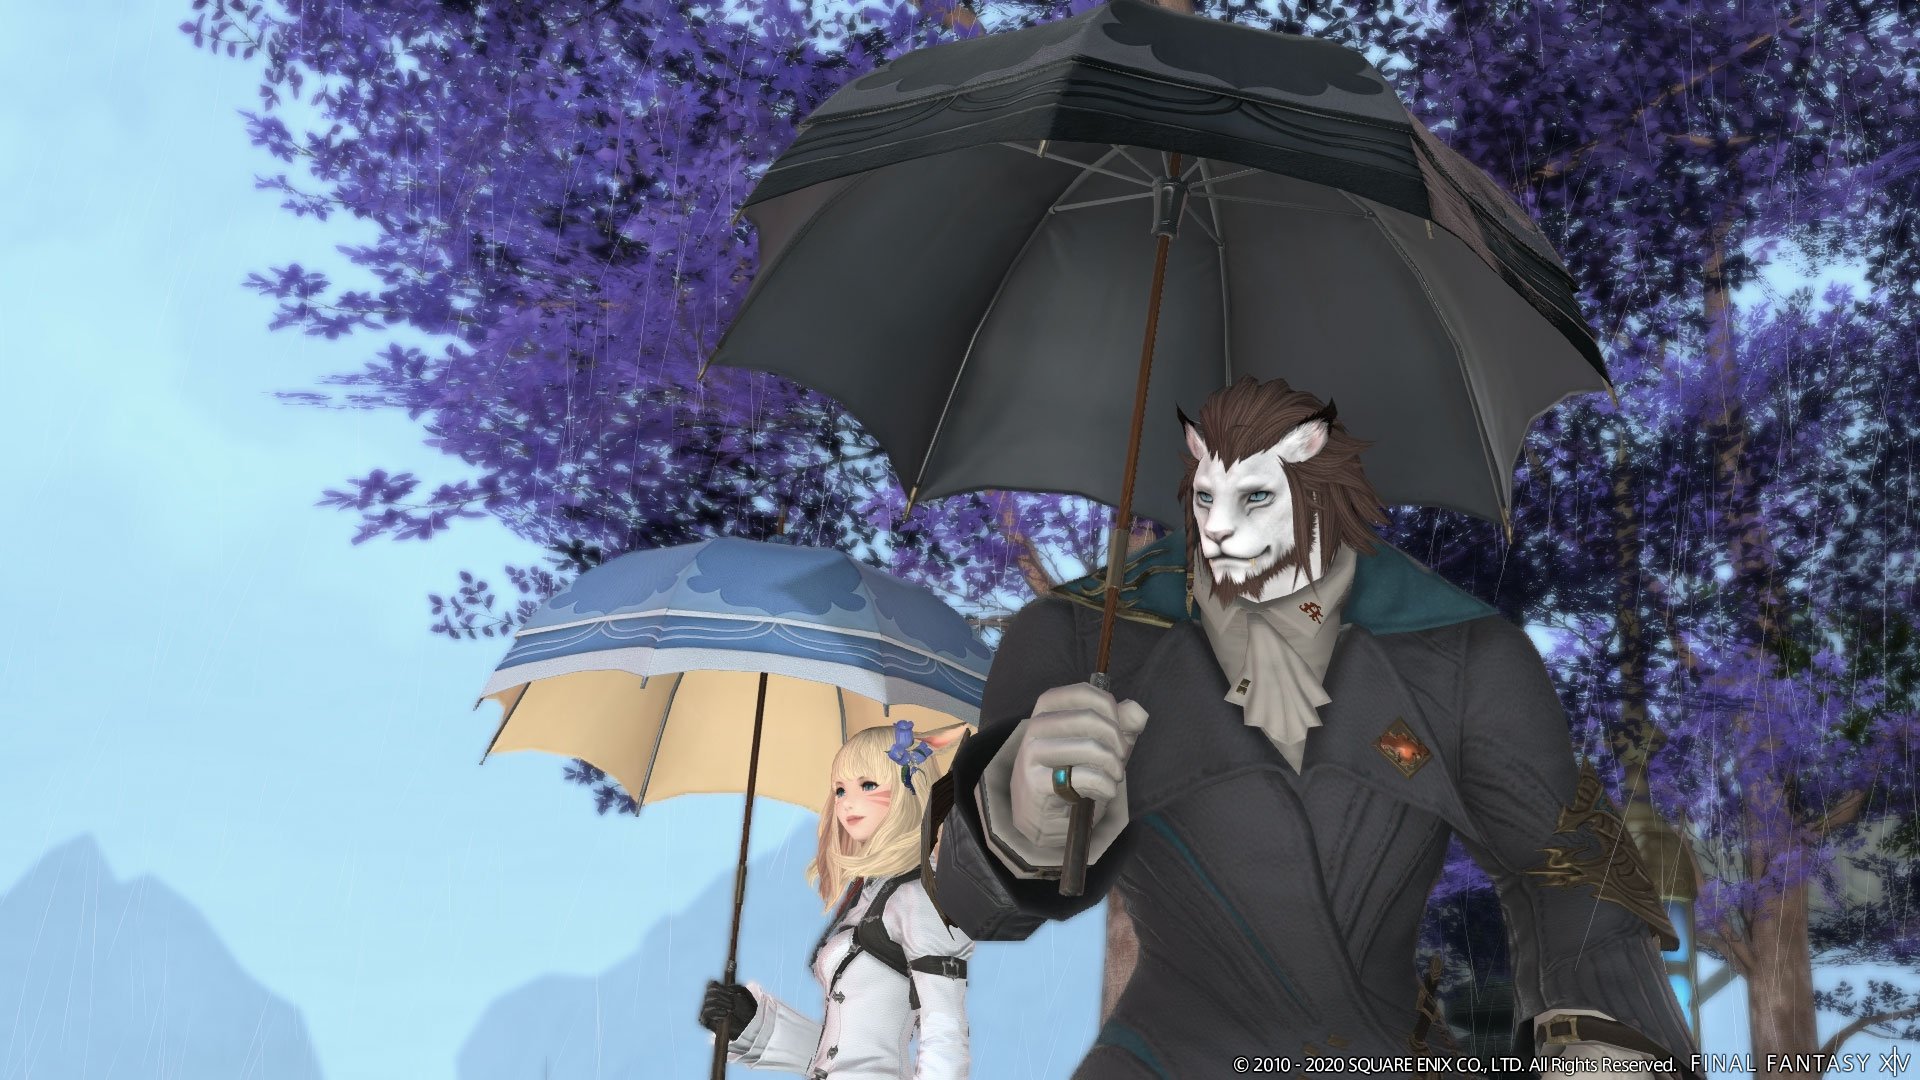 How To Do The Umbrella Dance In FFXIV